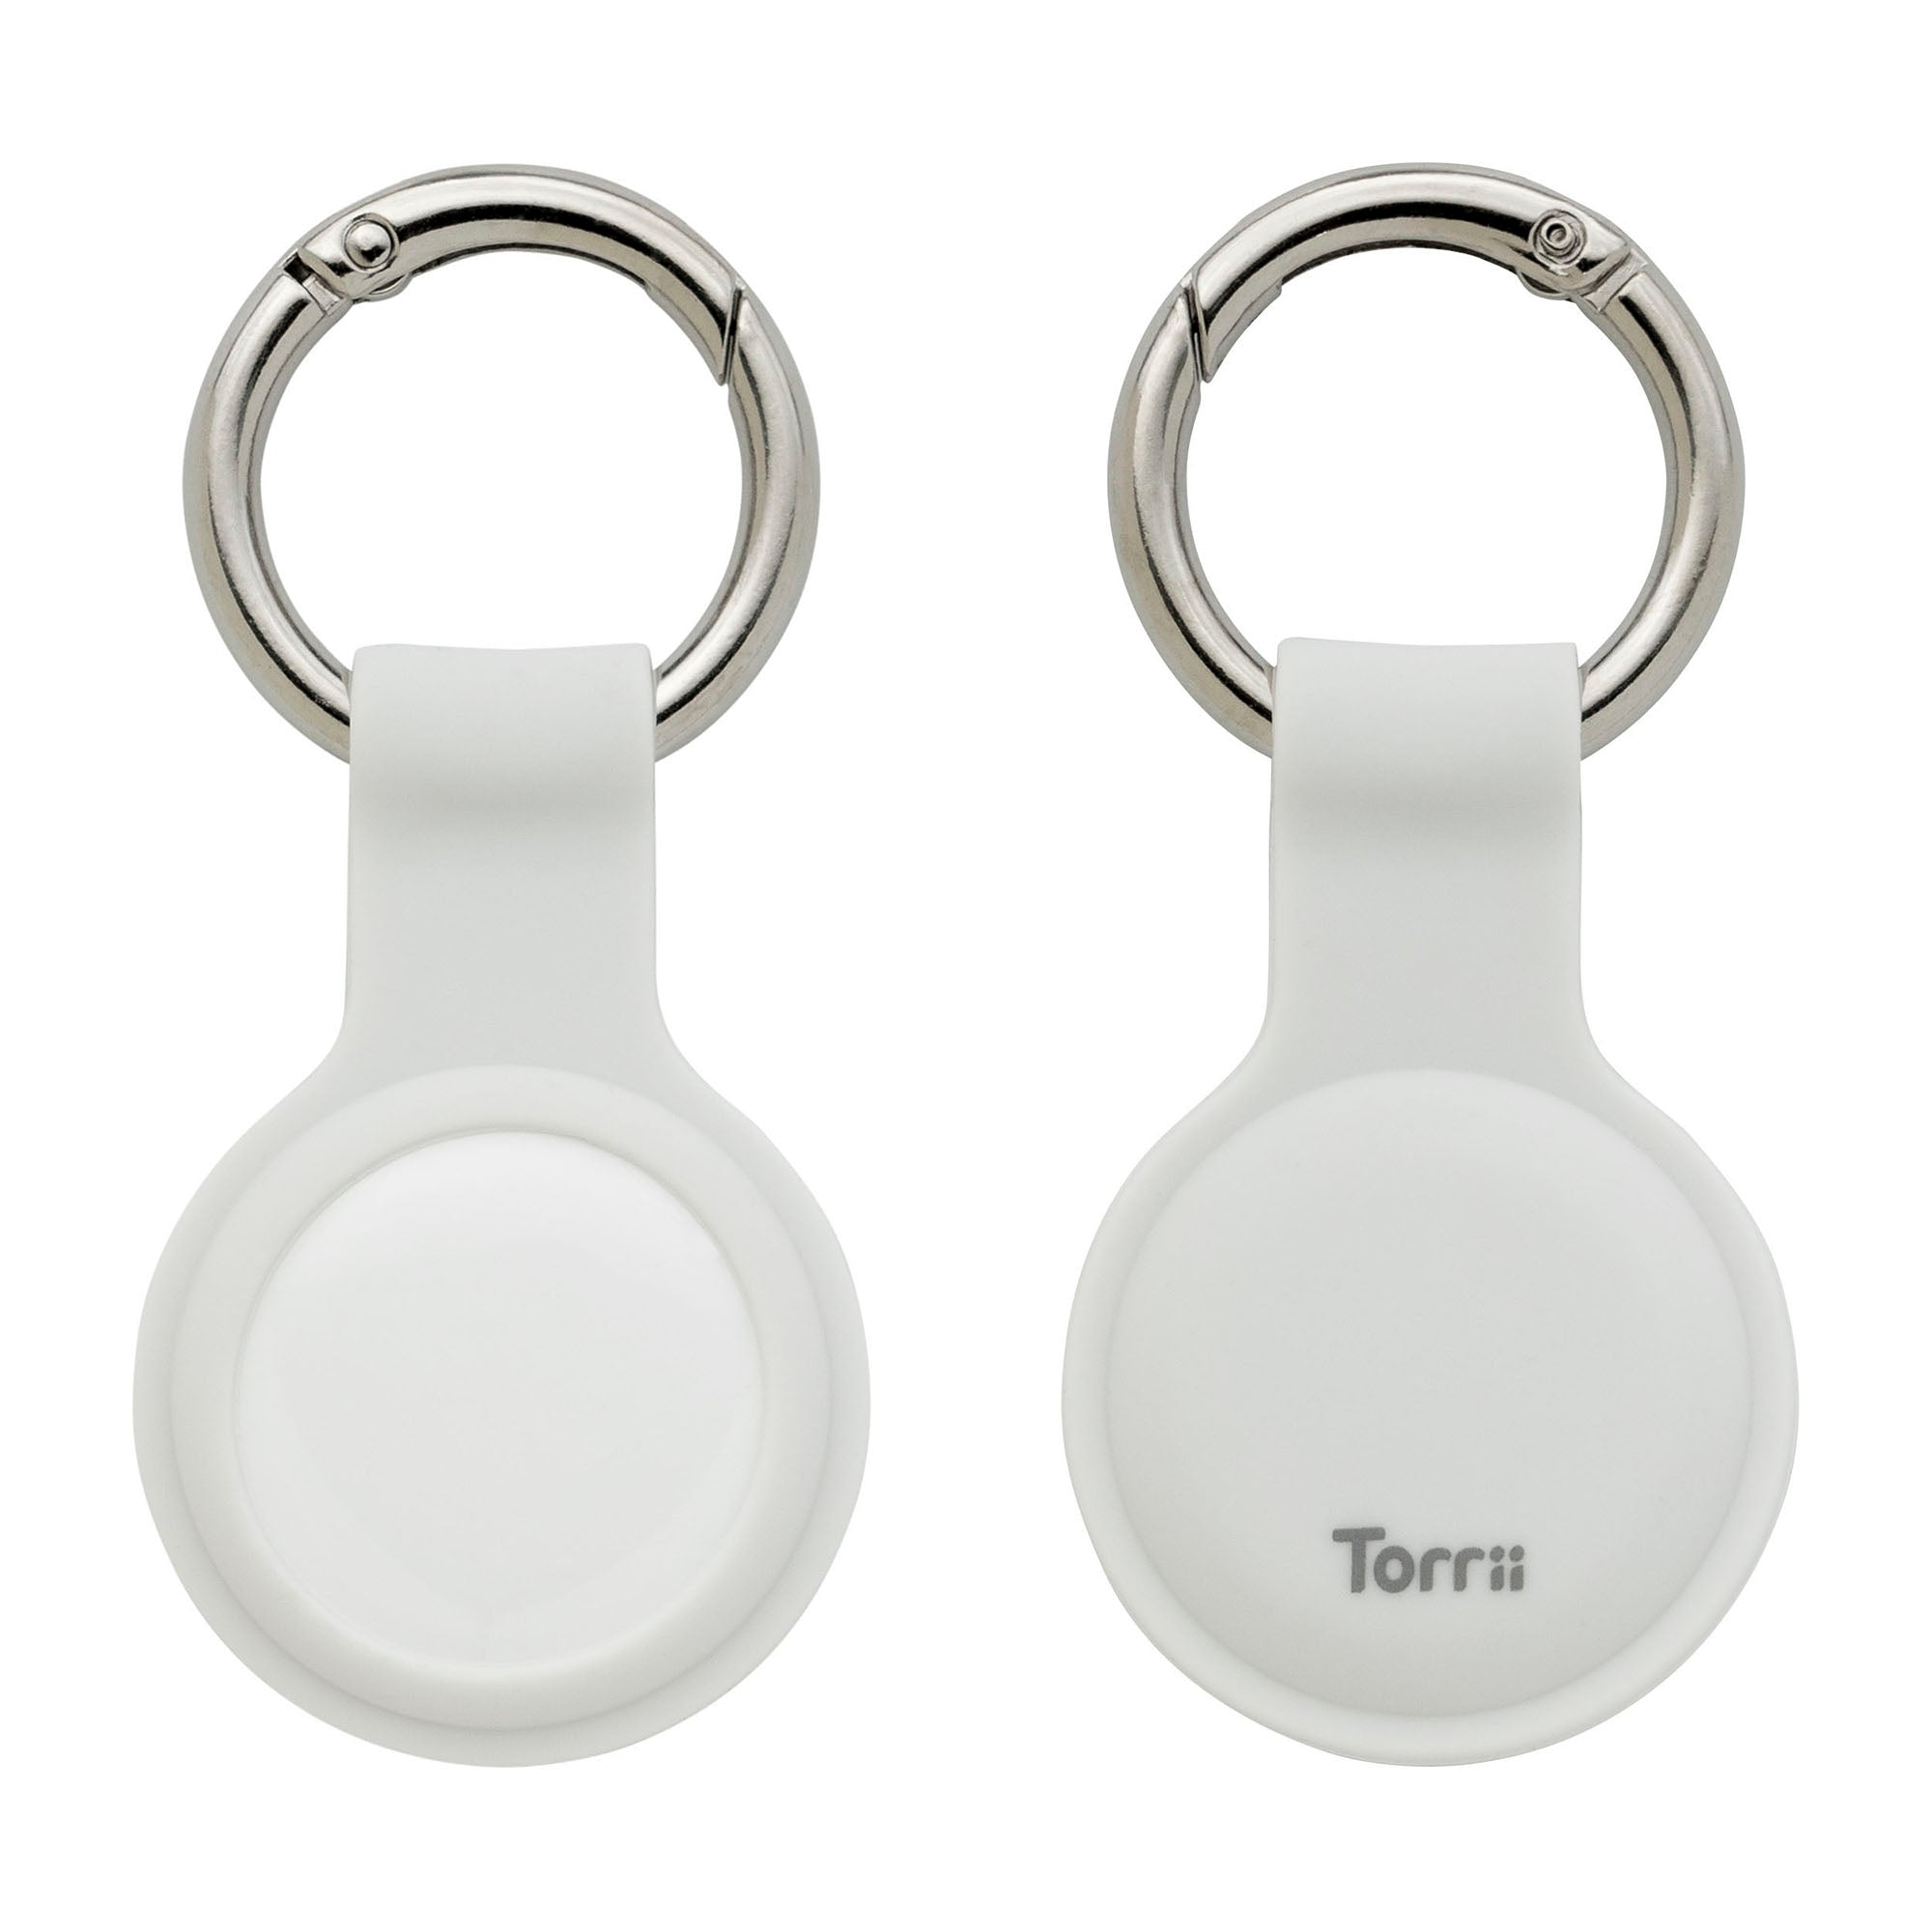 Torrii Bonjelly Silicone Key Ring For Apple Airtag - White